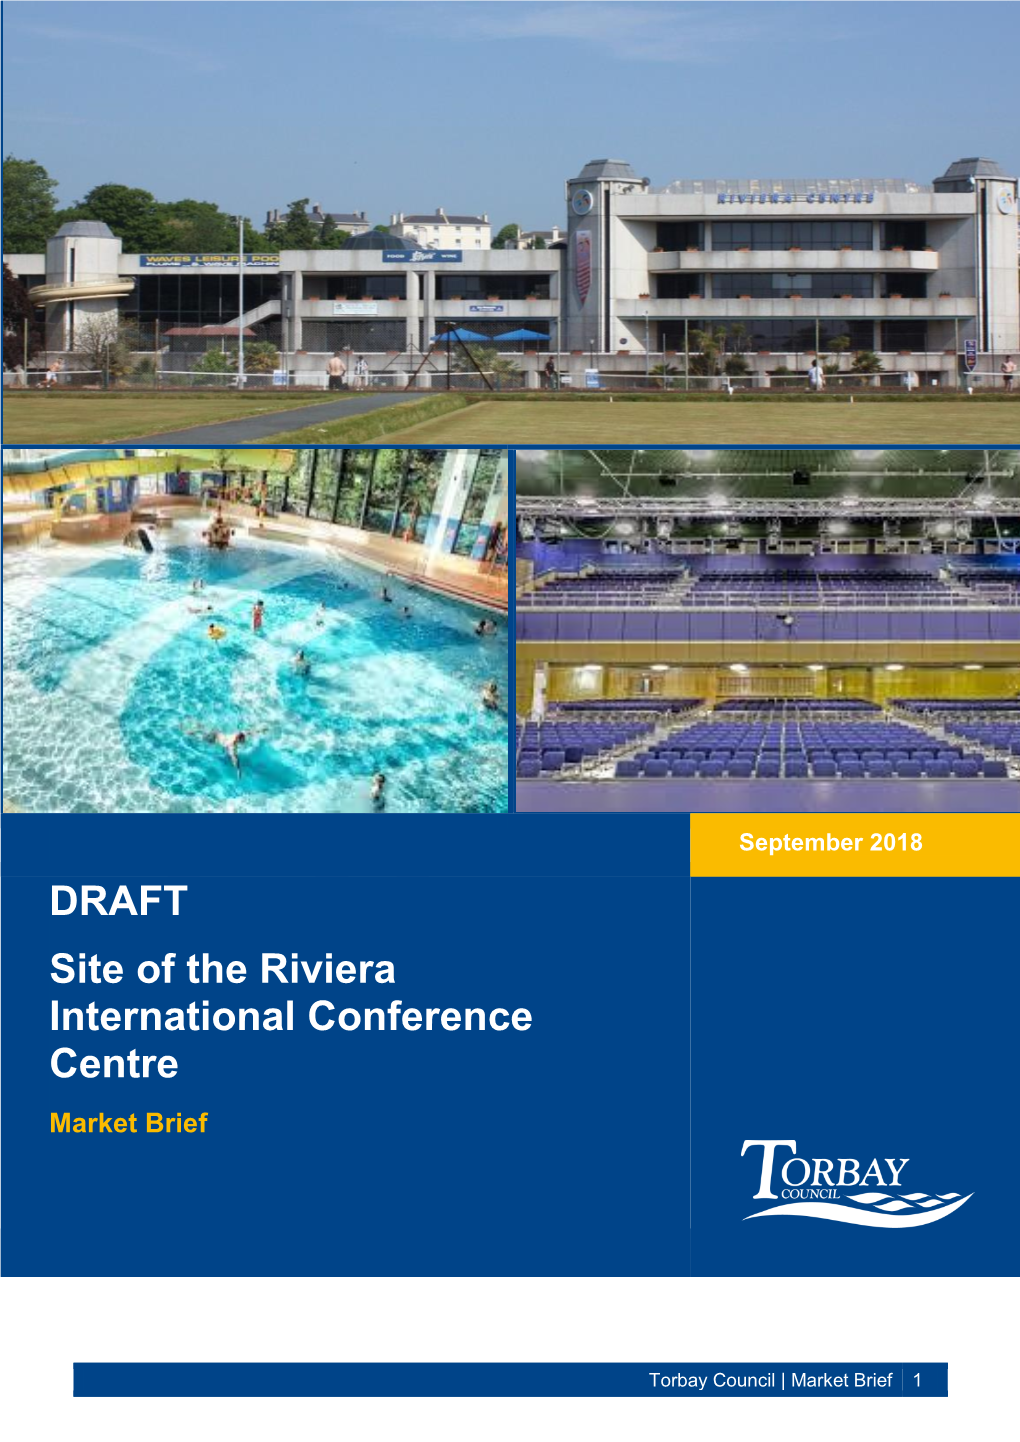 DRAFT Site of the Riviera International Conference Centre Market Brief